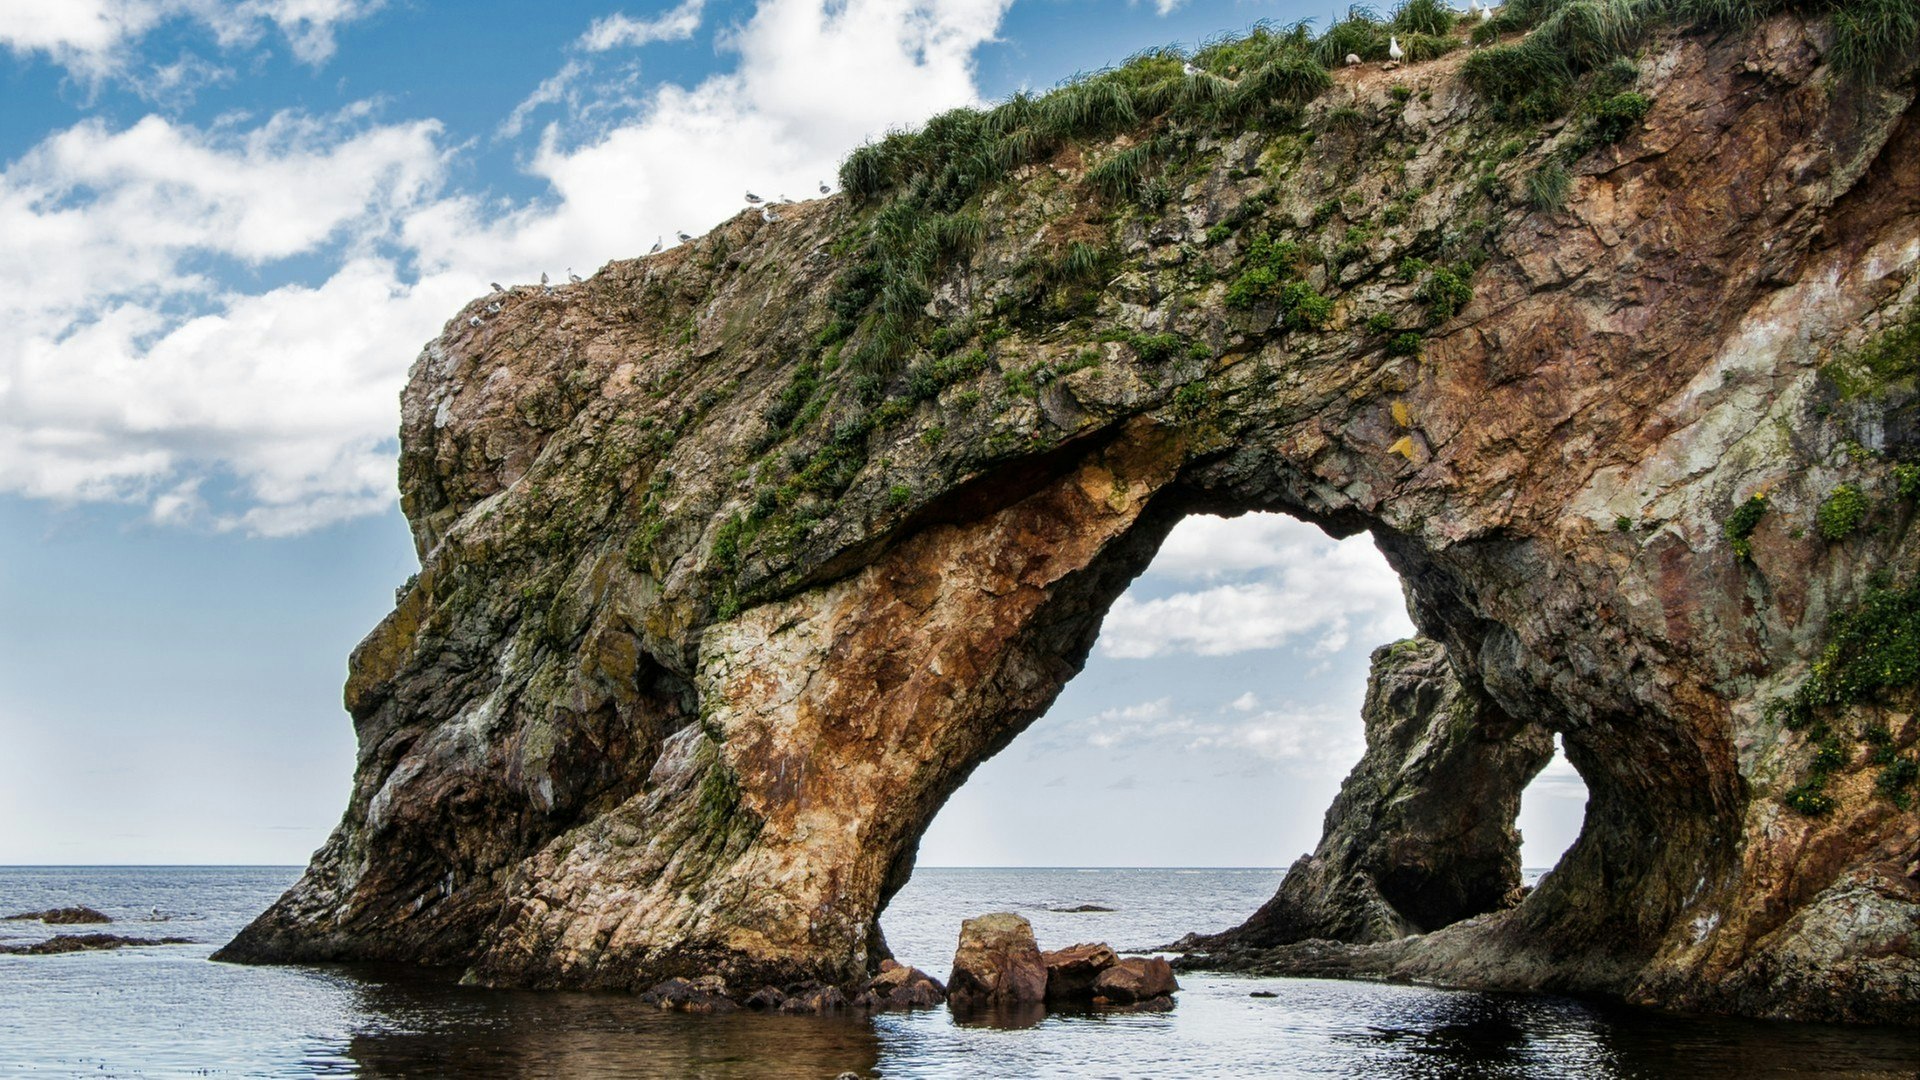 Beautiful stone natural arches. Rock formation, on the top of which gulls live